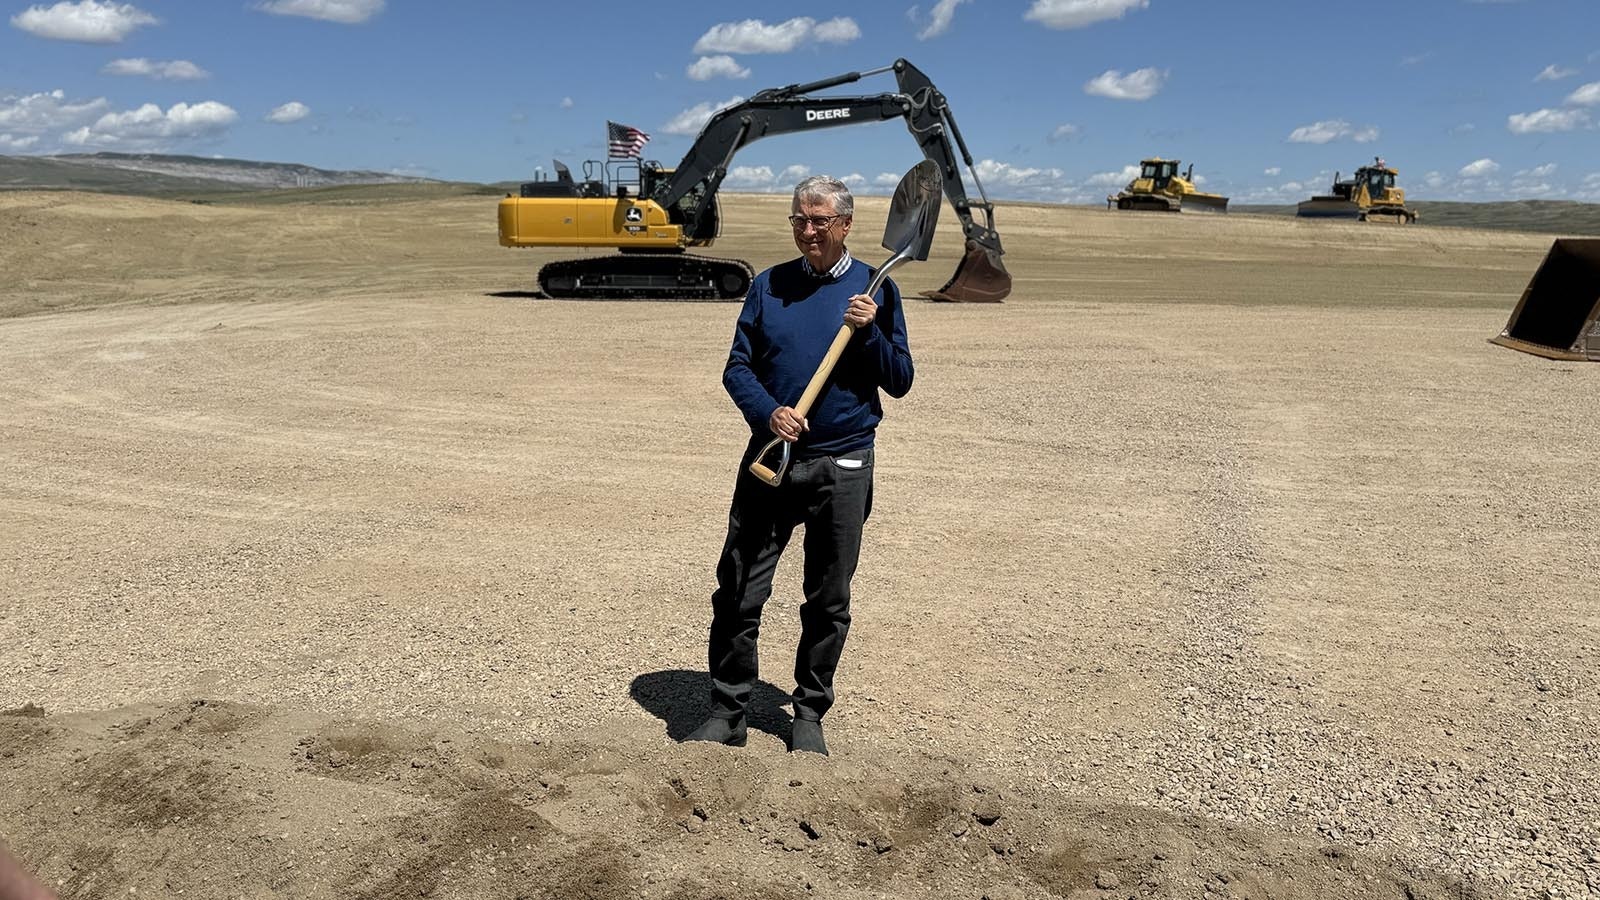 Billionaire Bill Gates shows off a shovel he used to dig up dirt in a groundbreaking ceremony for TerraPower’s nuclear reactor project in Kemmerer, Wyoming.